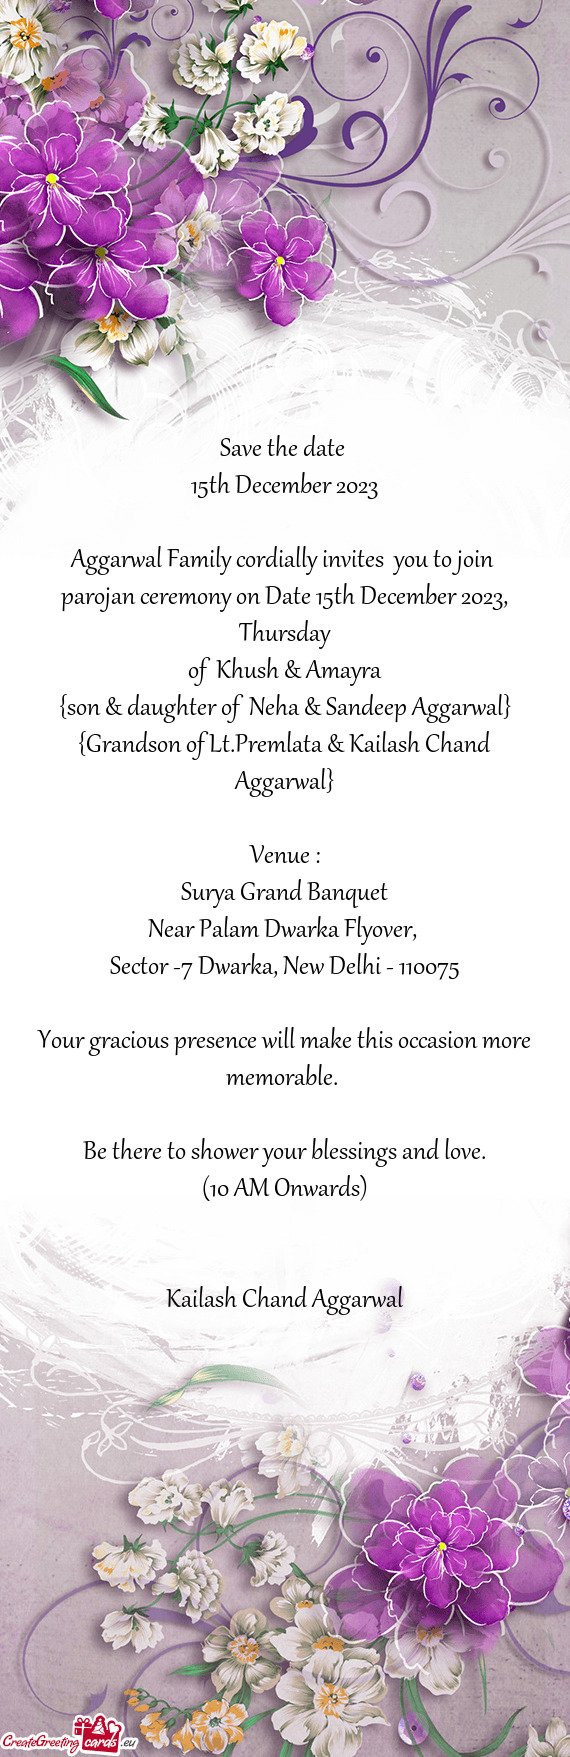 Aggarwal Family cordially invites you to join parojan ceremony on Date 15th December 2023, Thursda